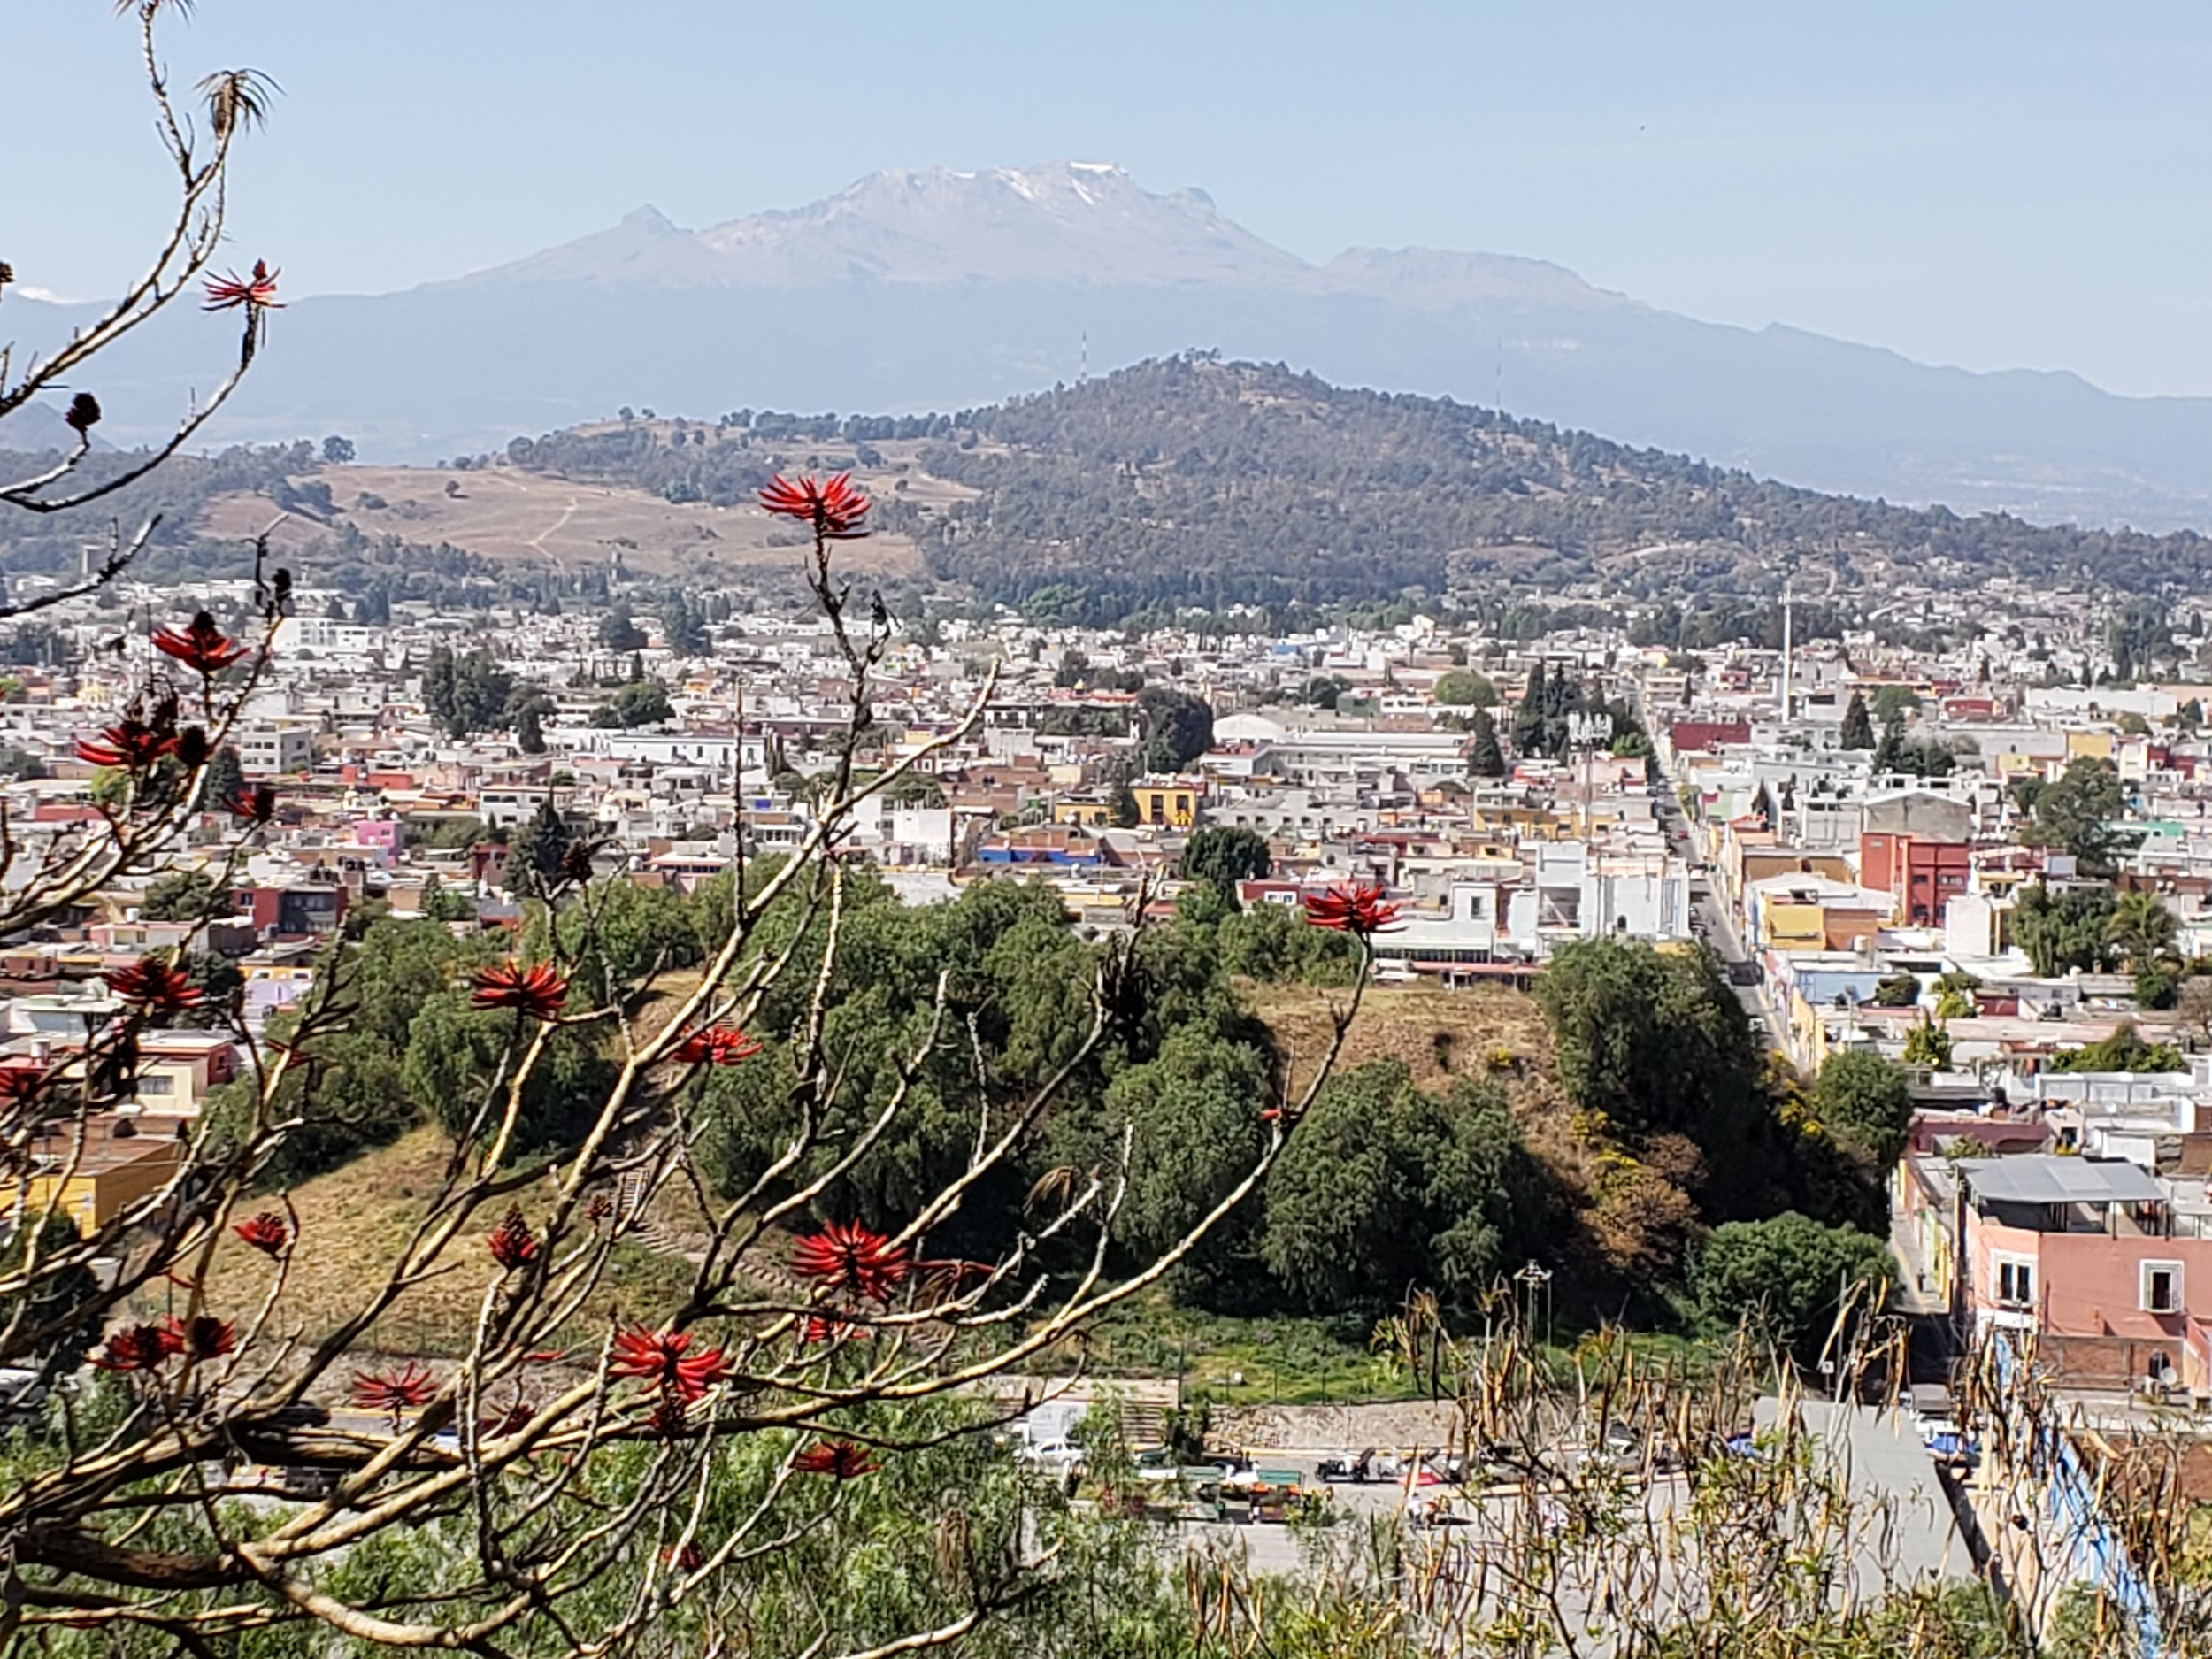 View of volcanos that separate Cholulu from Mexico City